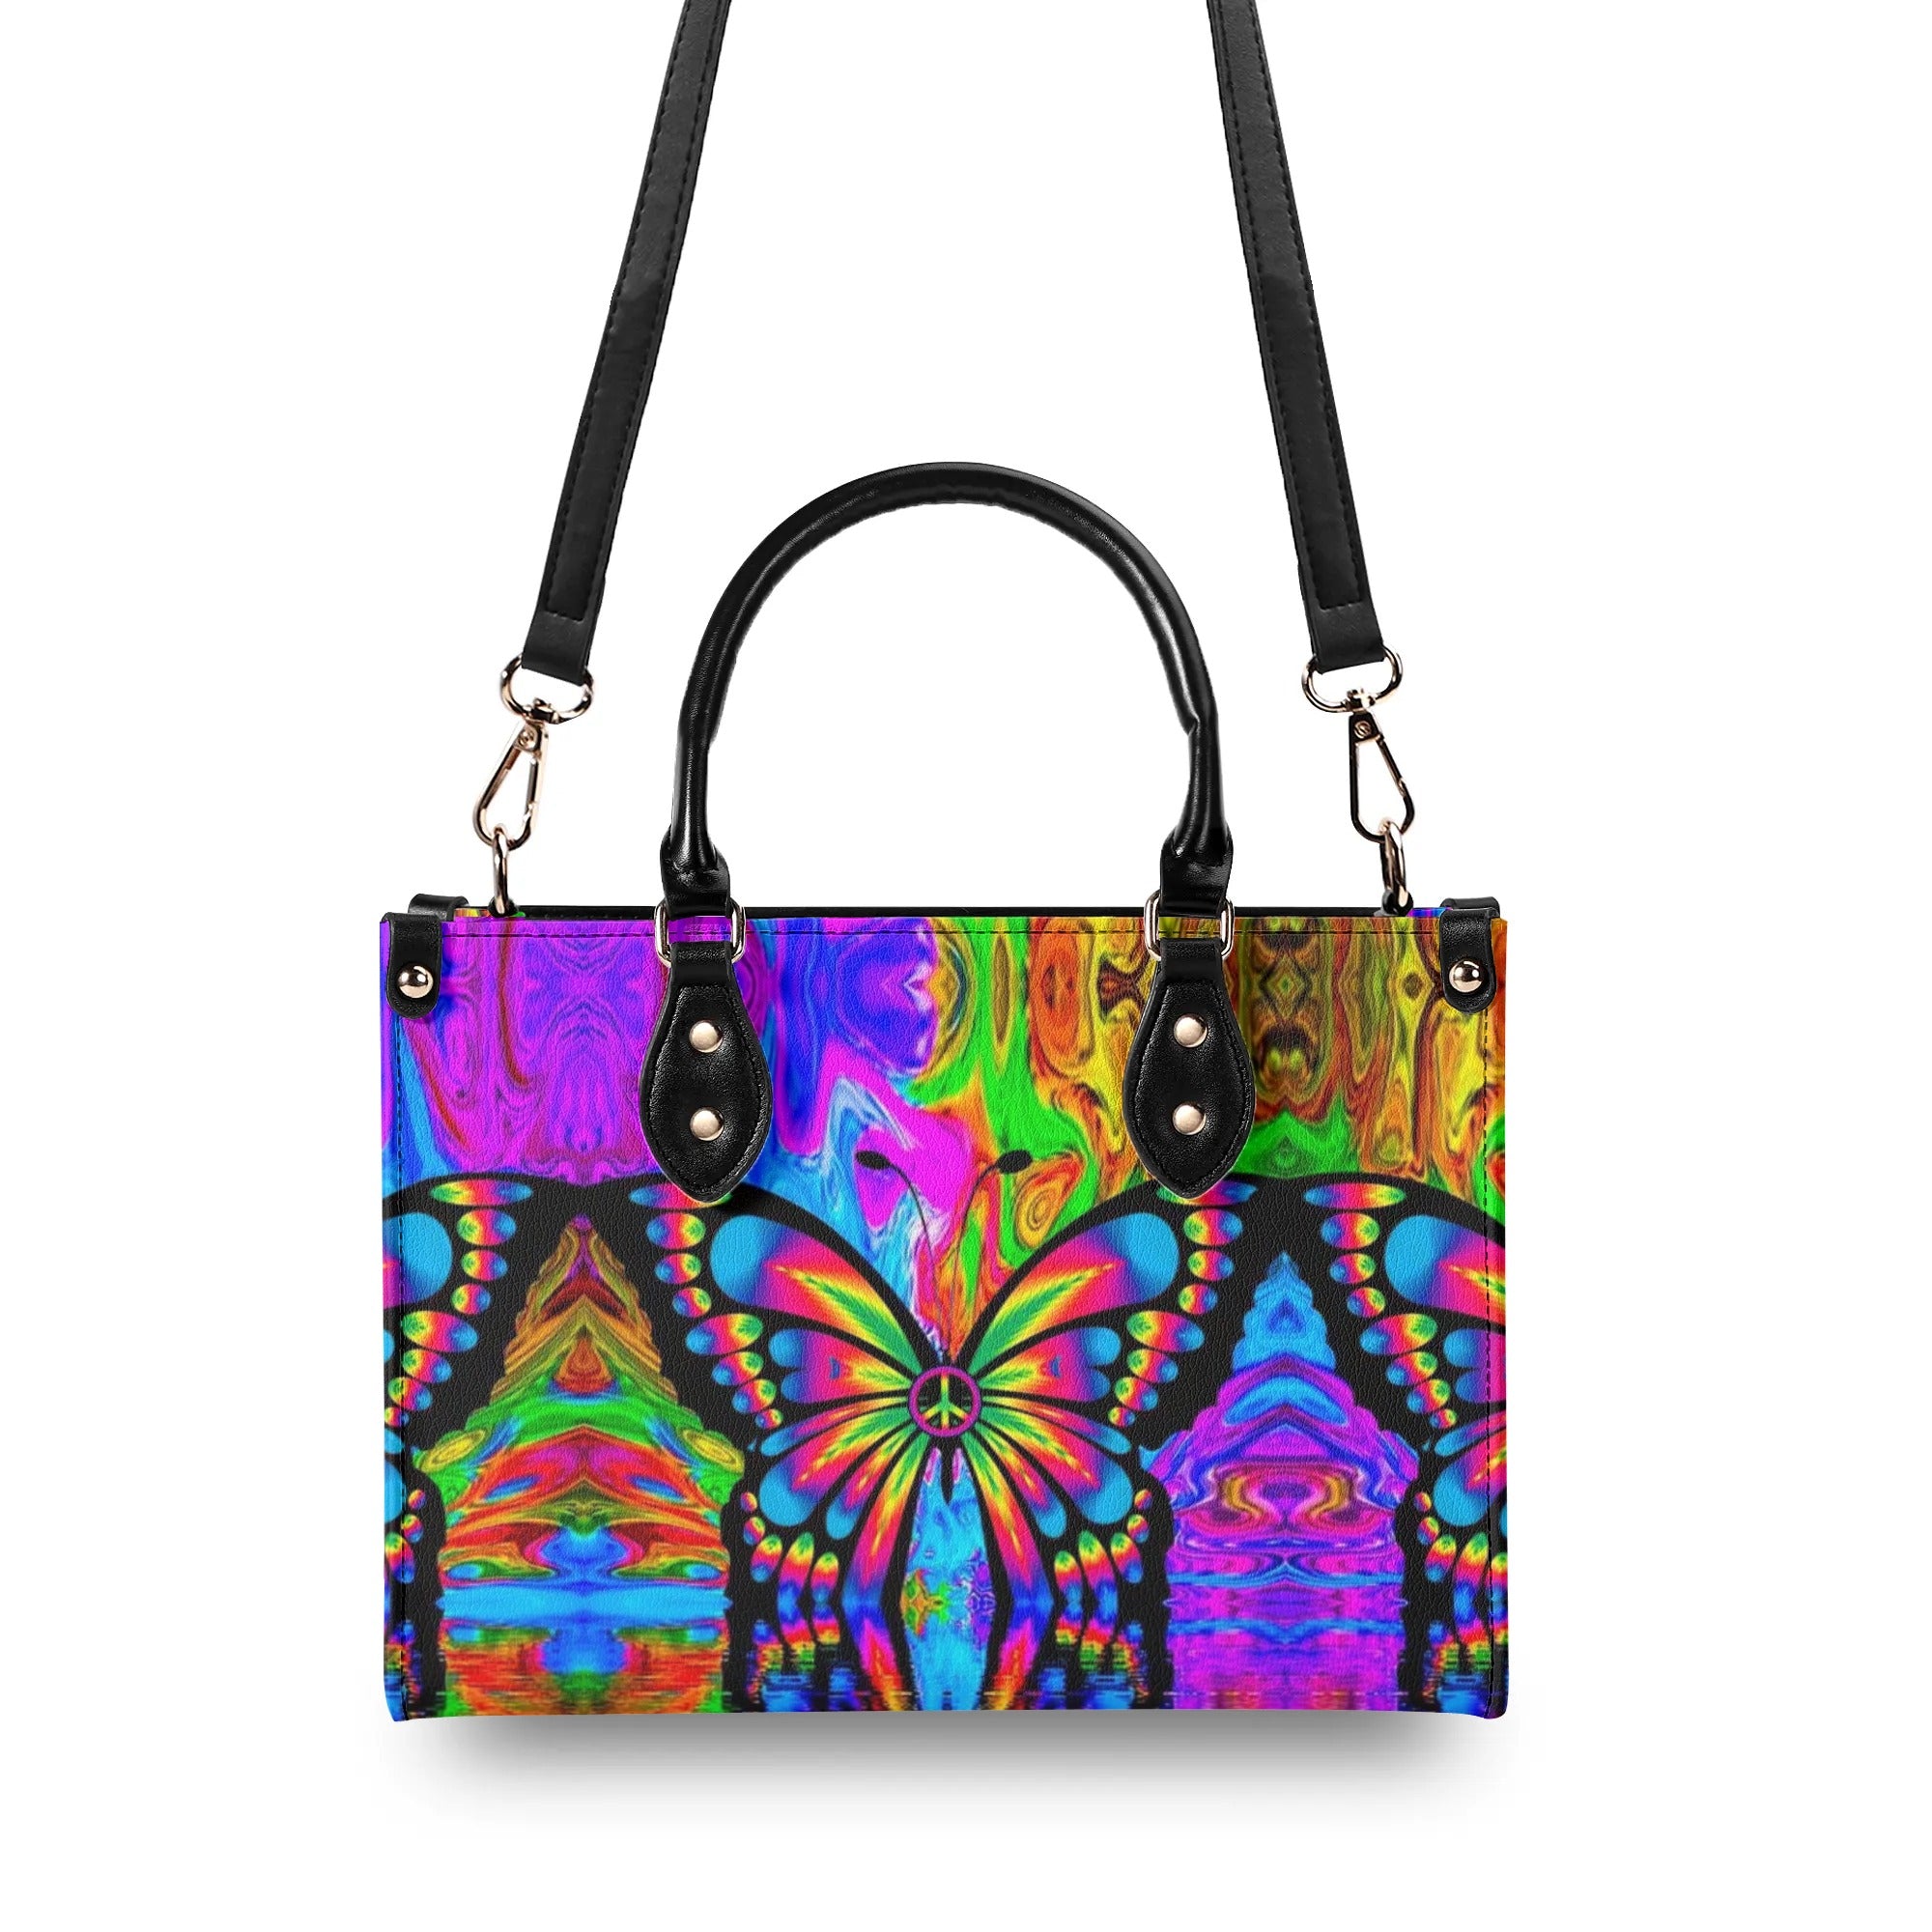 BUTTERFLY COLORFUL LEATHER HANDBAG - TLTW1106243